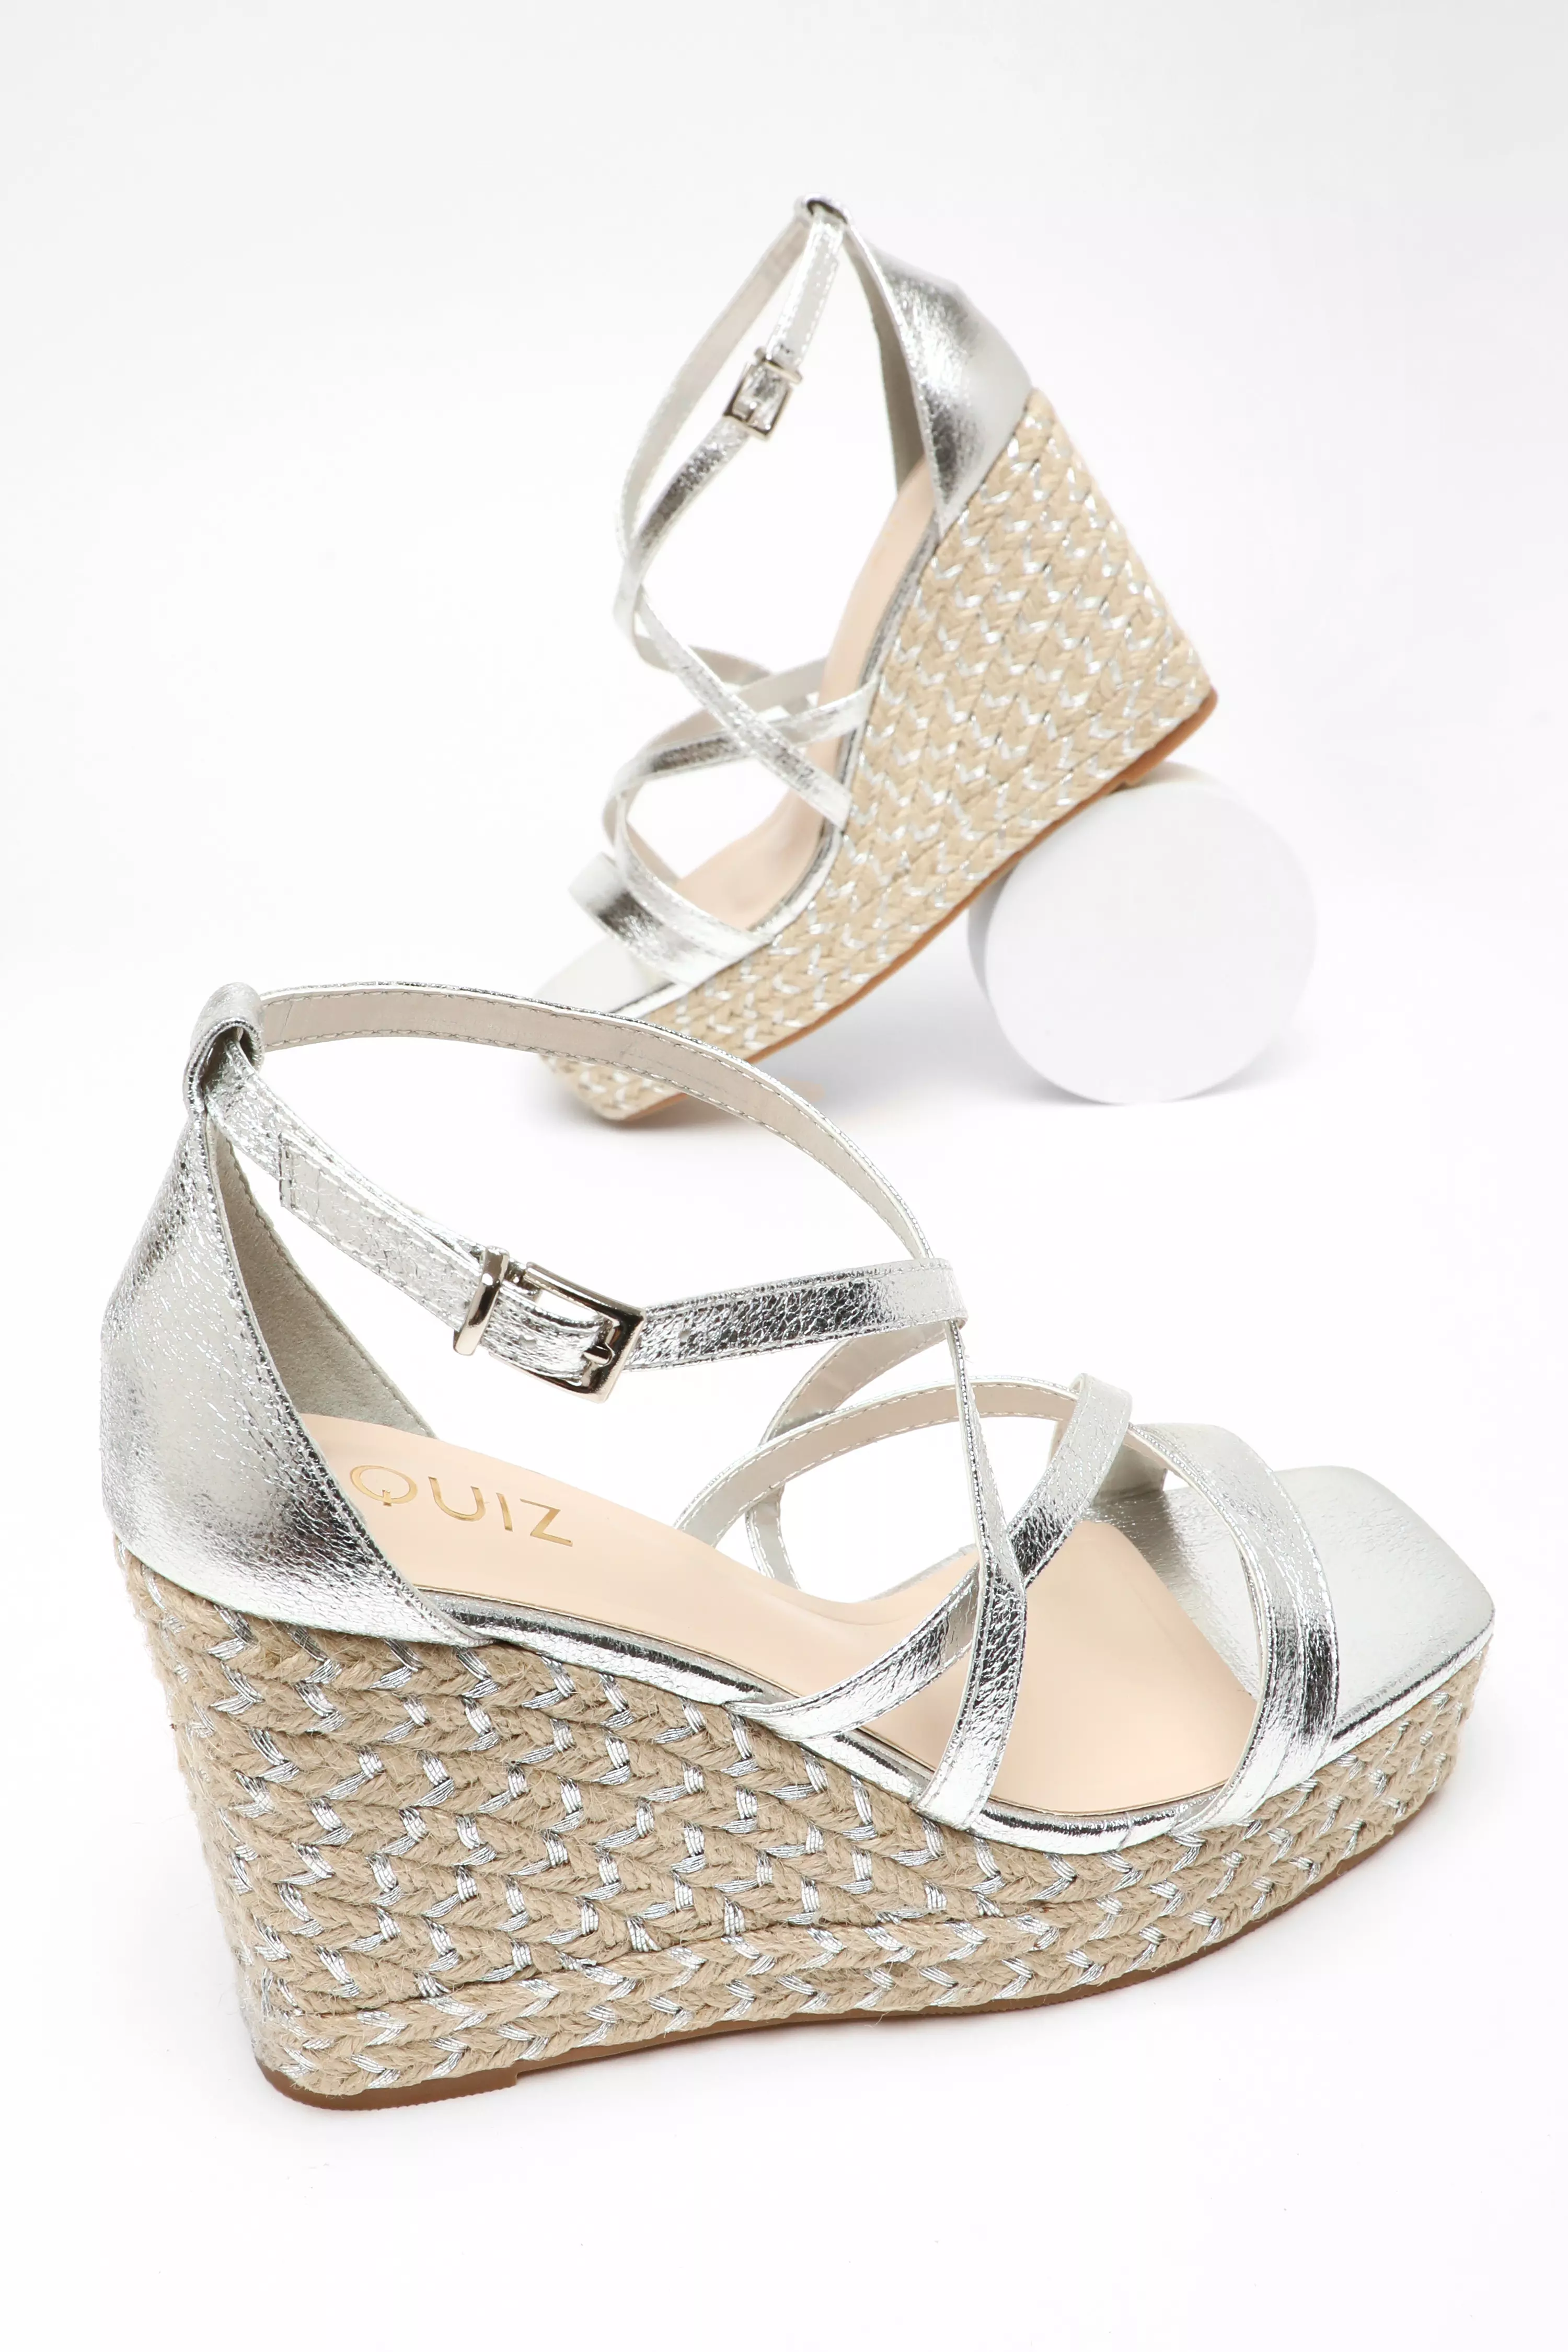 Silver Foil Strappy Woven Wedges